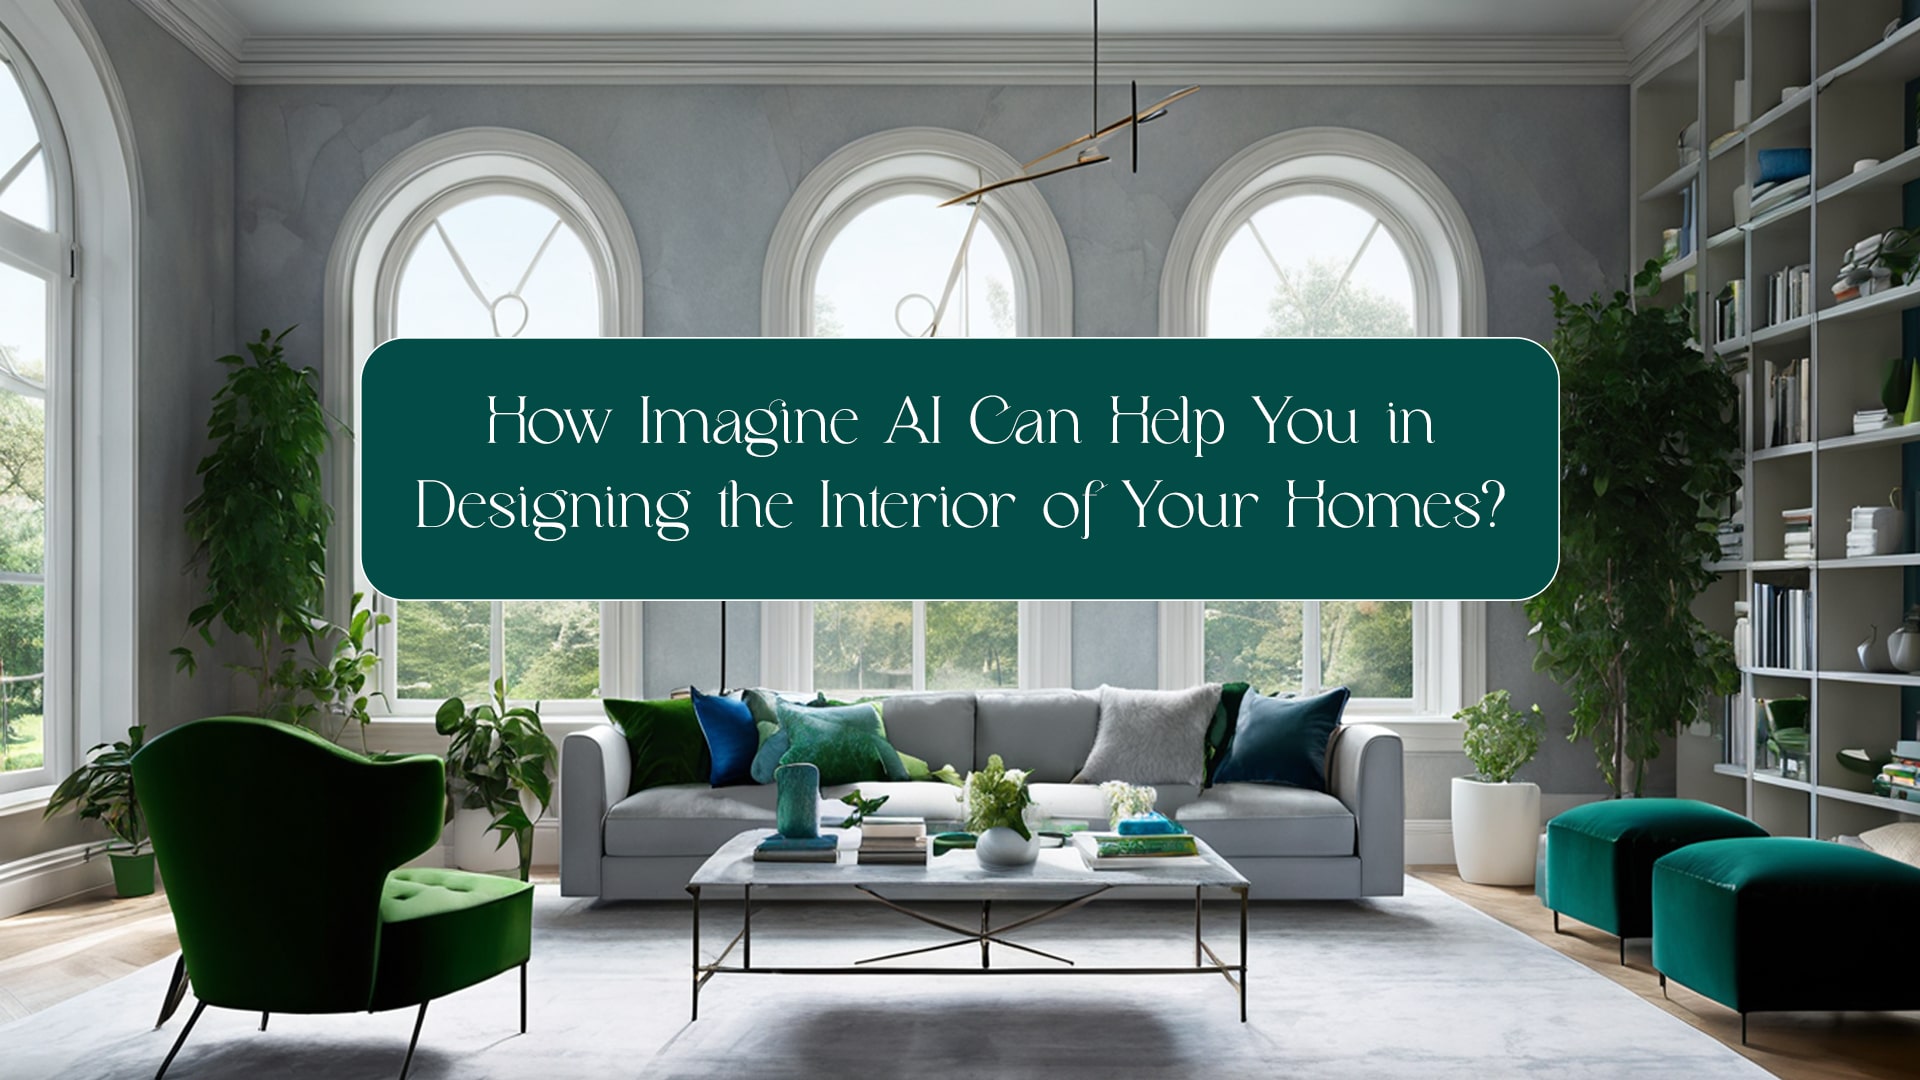 How Imagine AI Can Help You in Designing the Interior of Your Homes?